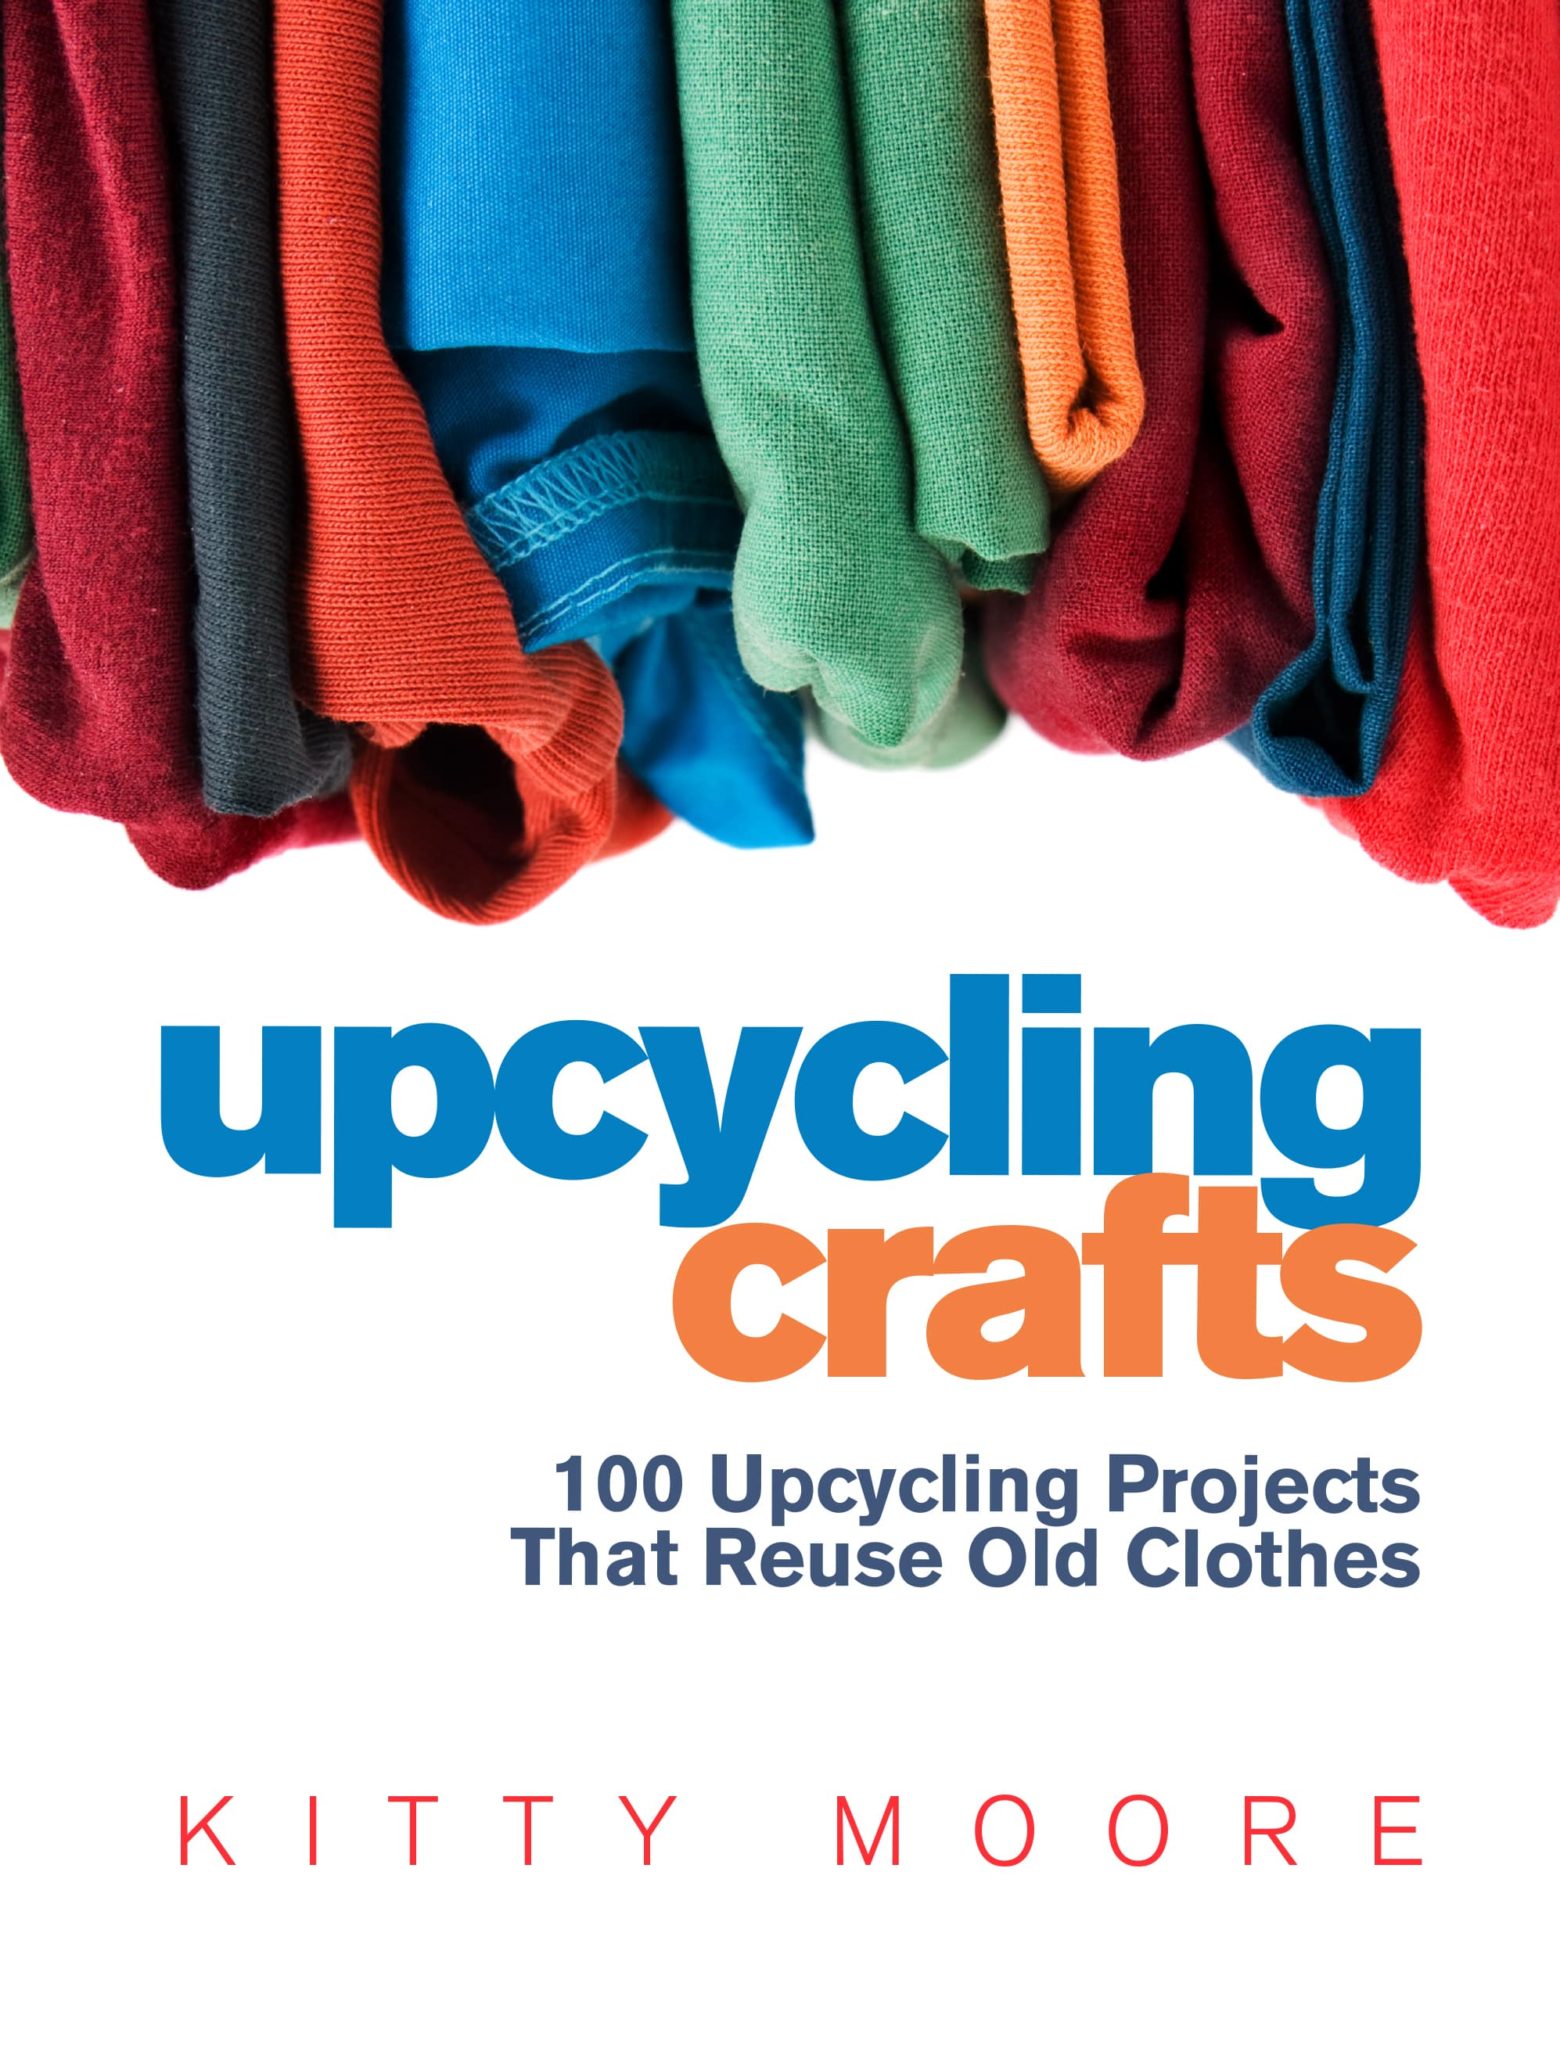 FREE: Upcycling Crafts (4th Edition): 100 Upcycling Projects That Reuse Old Clothes to Create Modern Fashion Accessories, Trendy New Clothes & Home Decor! by Kitty Moore